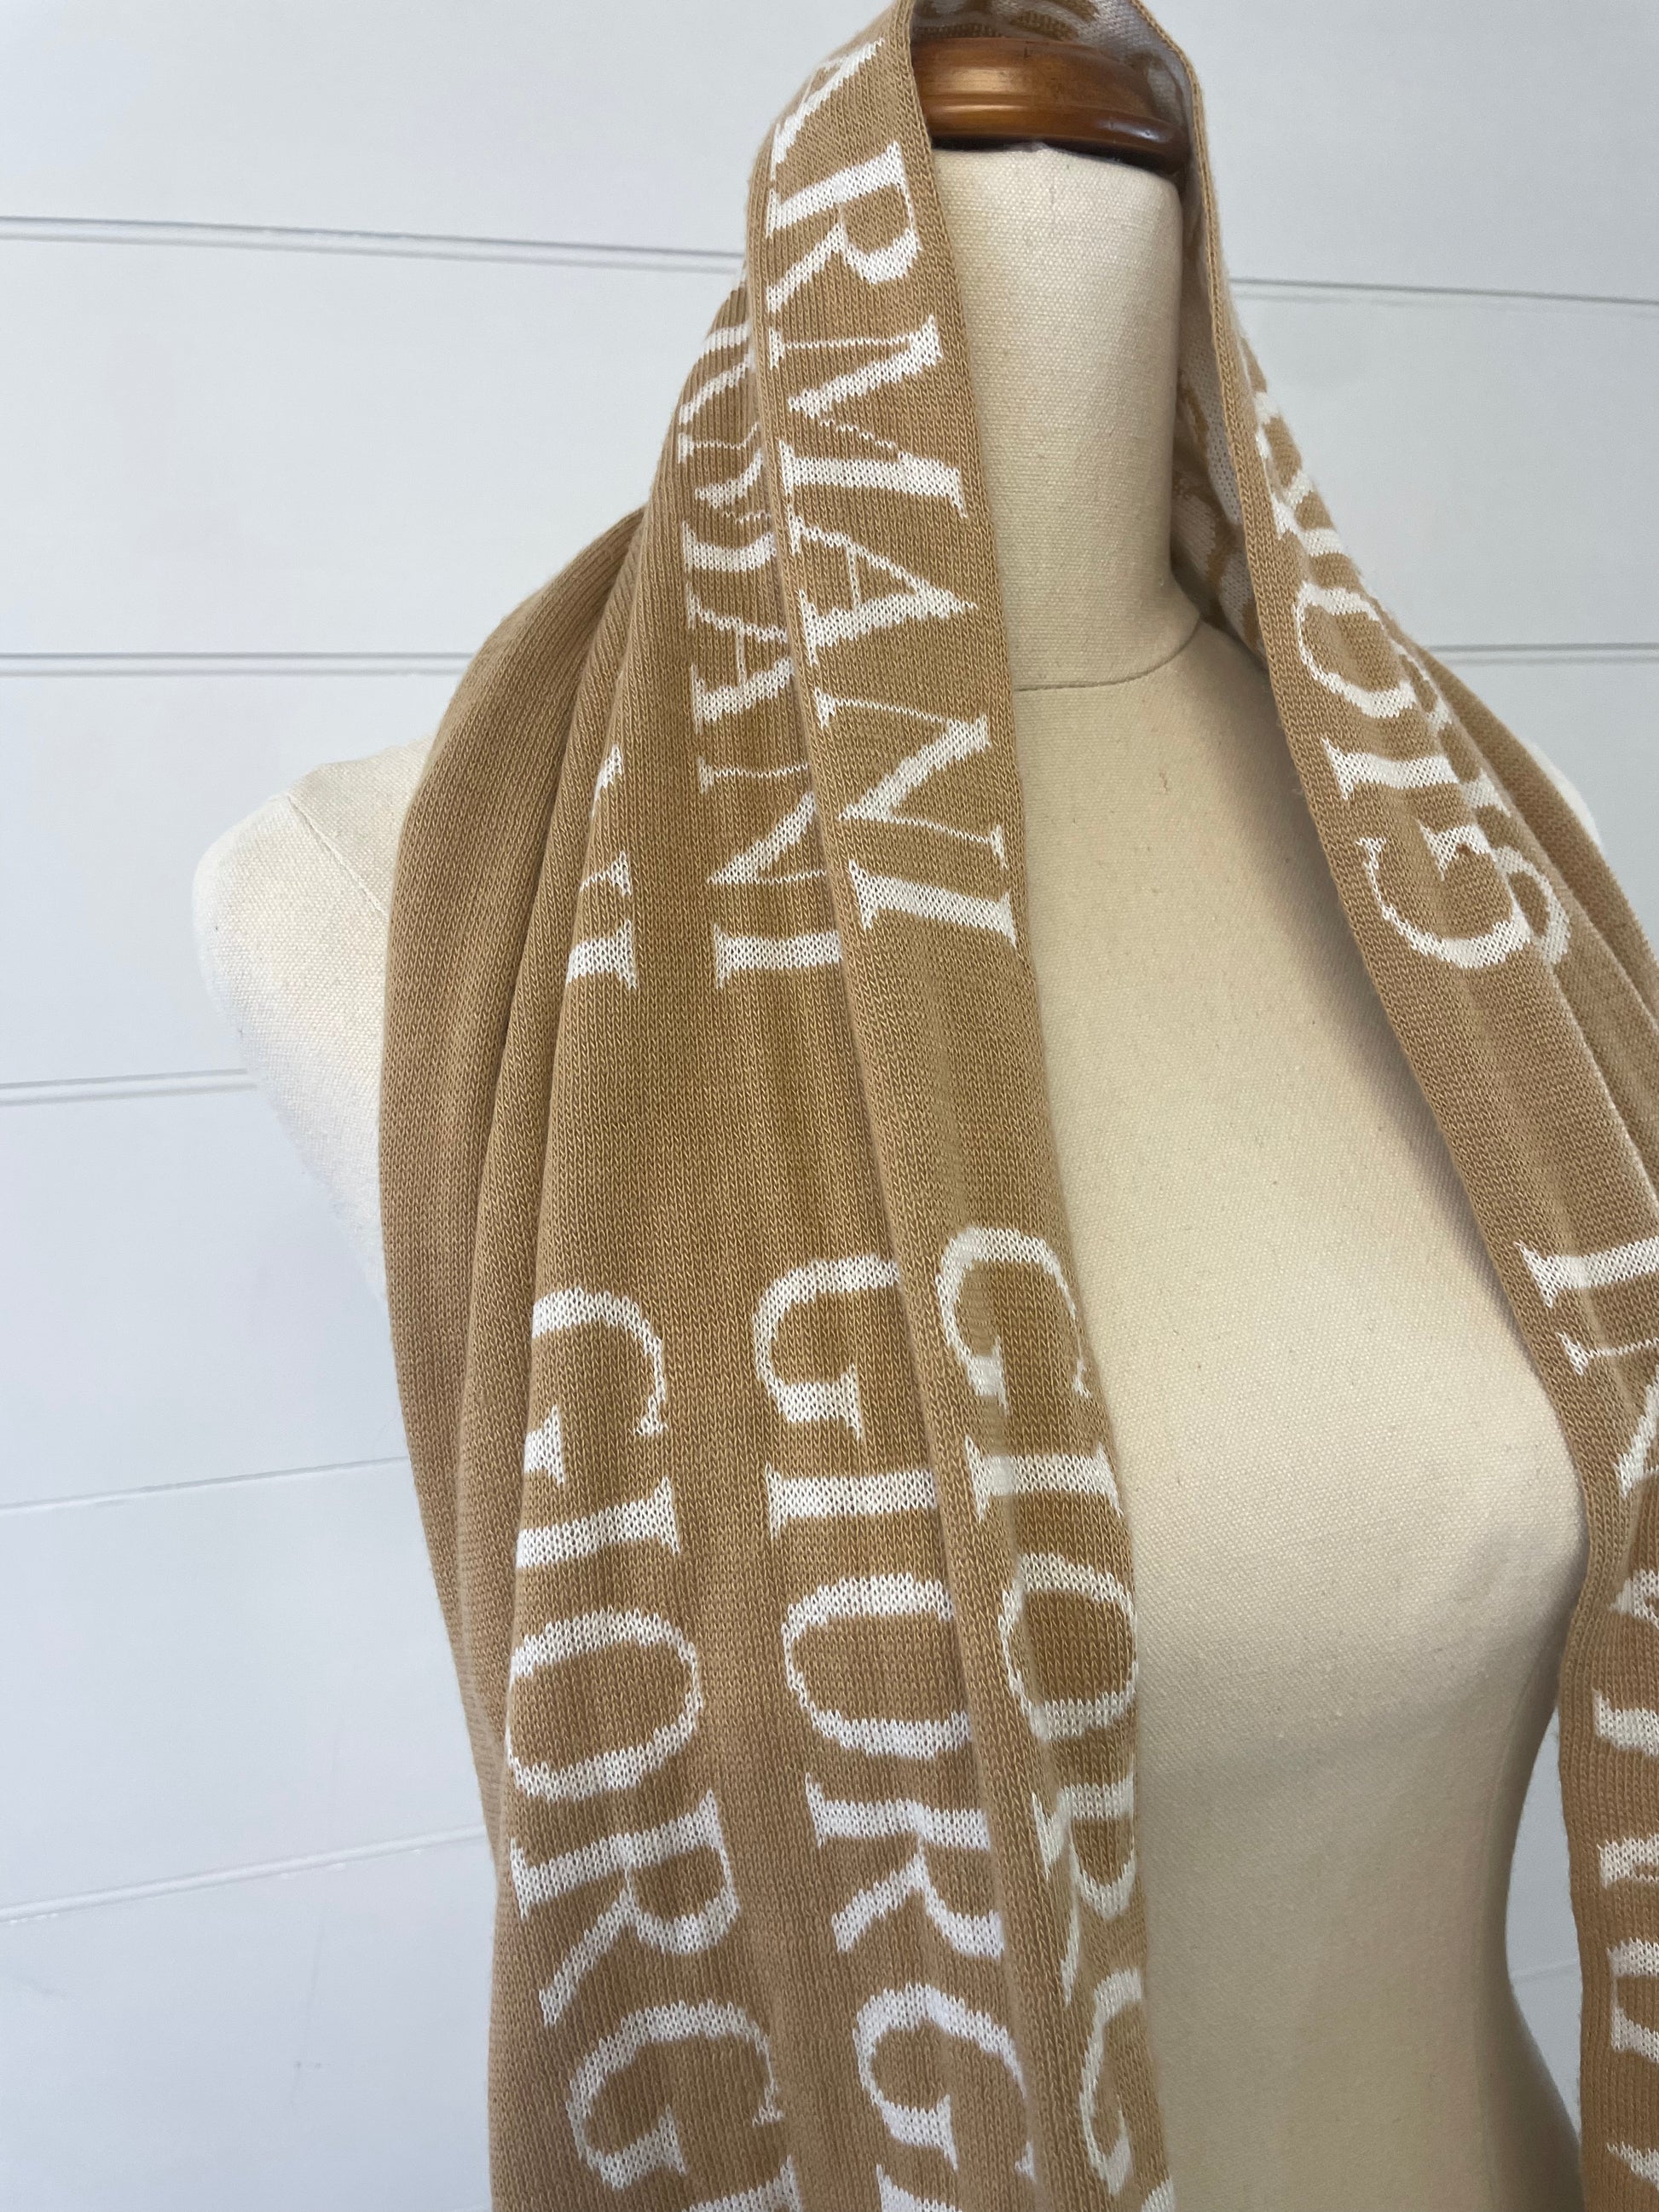 Giorgio Armani 100% wool scarf. Camel colour with white font and orange hem upclose picture